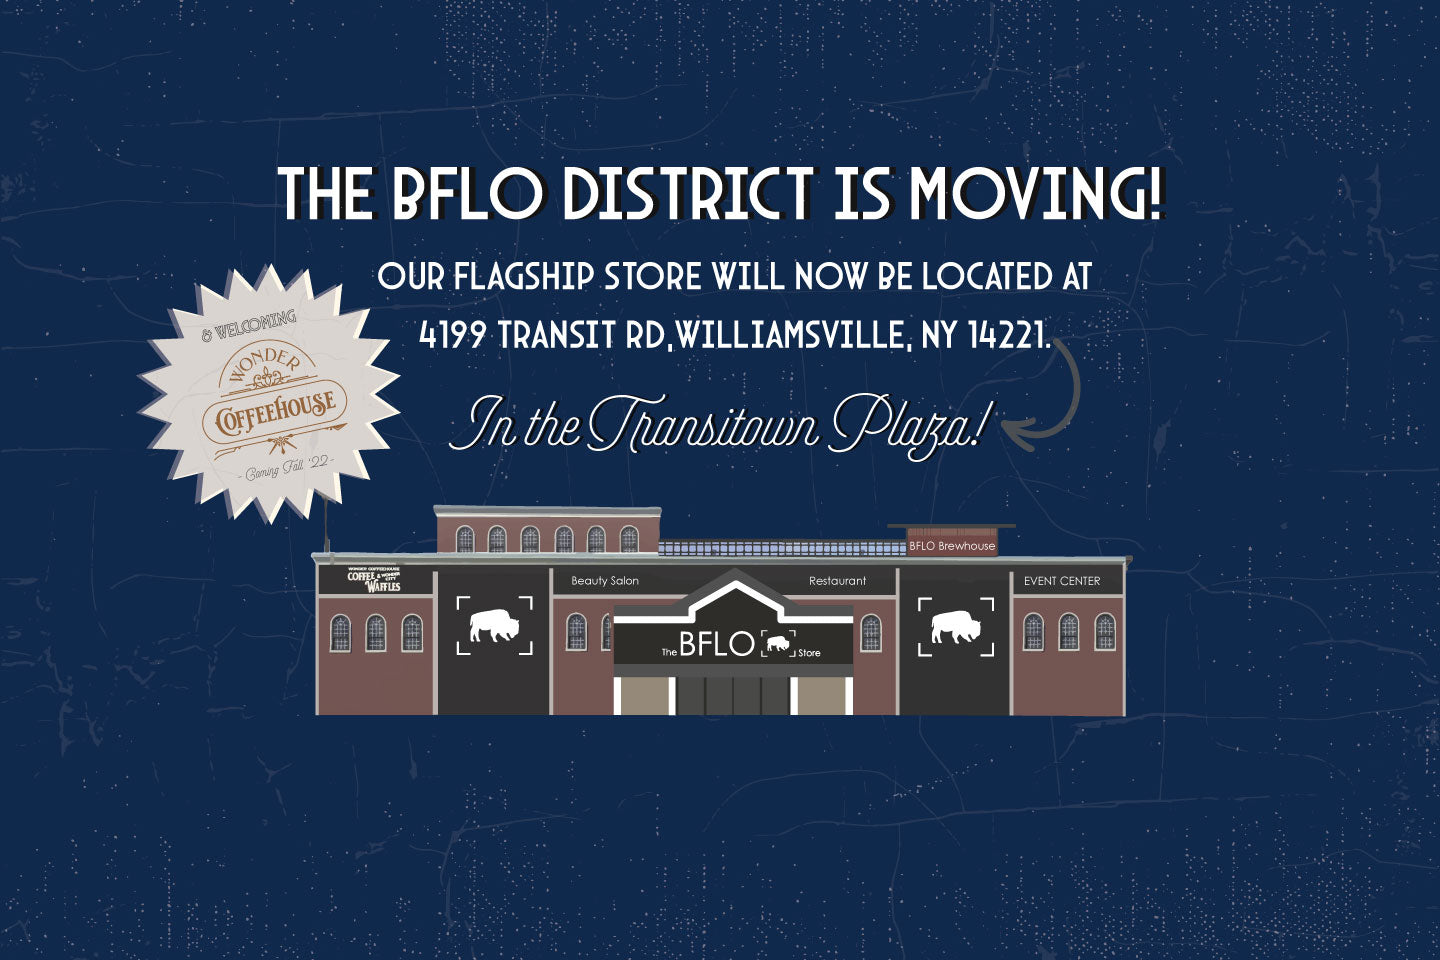 bflo store district is moving with grand opening and 716 day event in transitown plaza